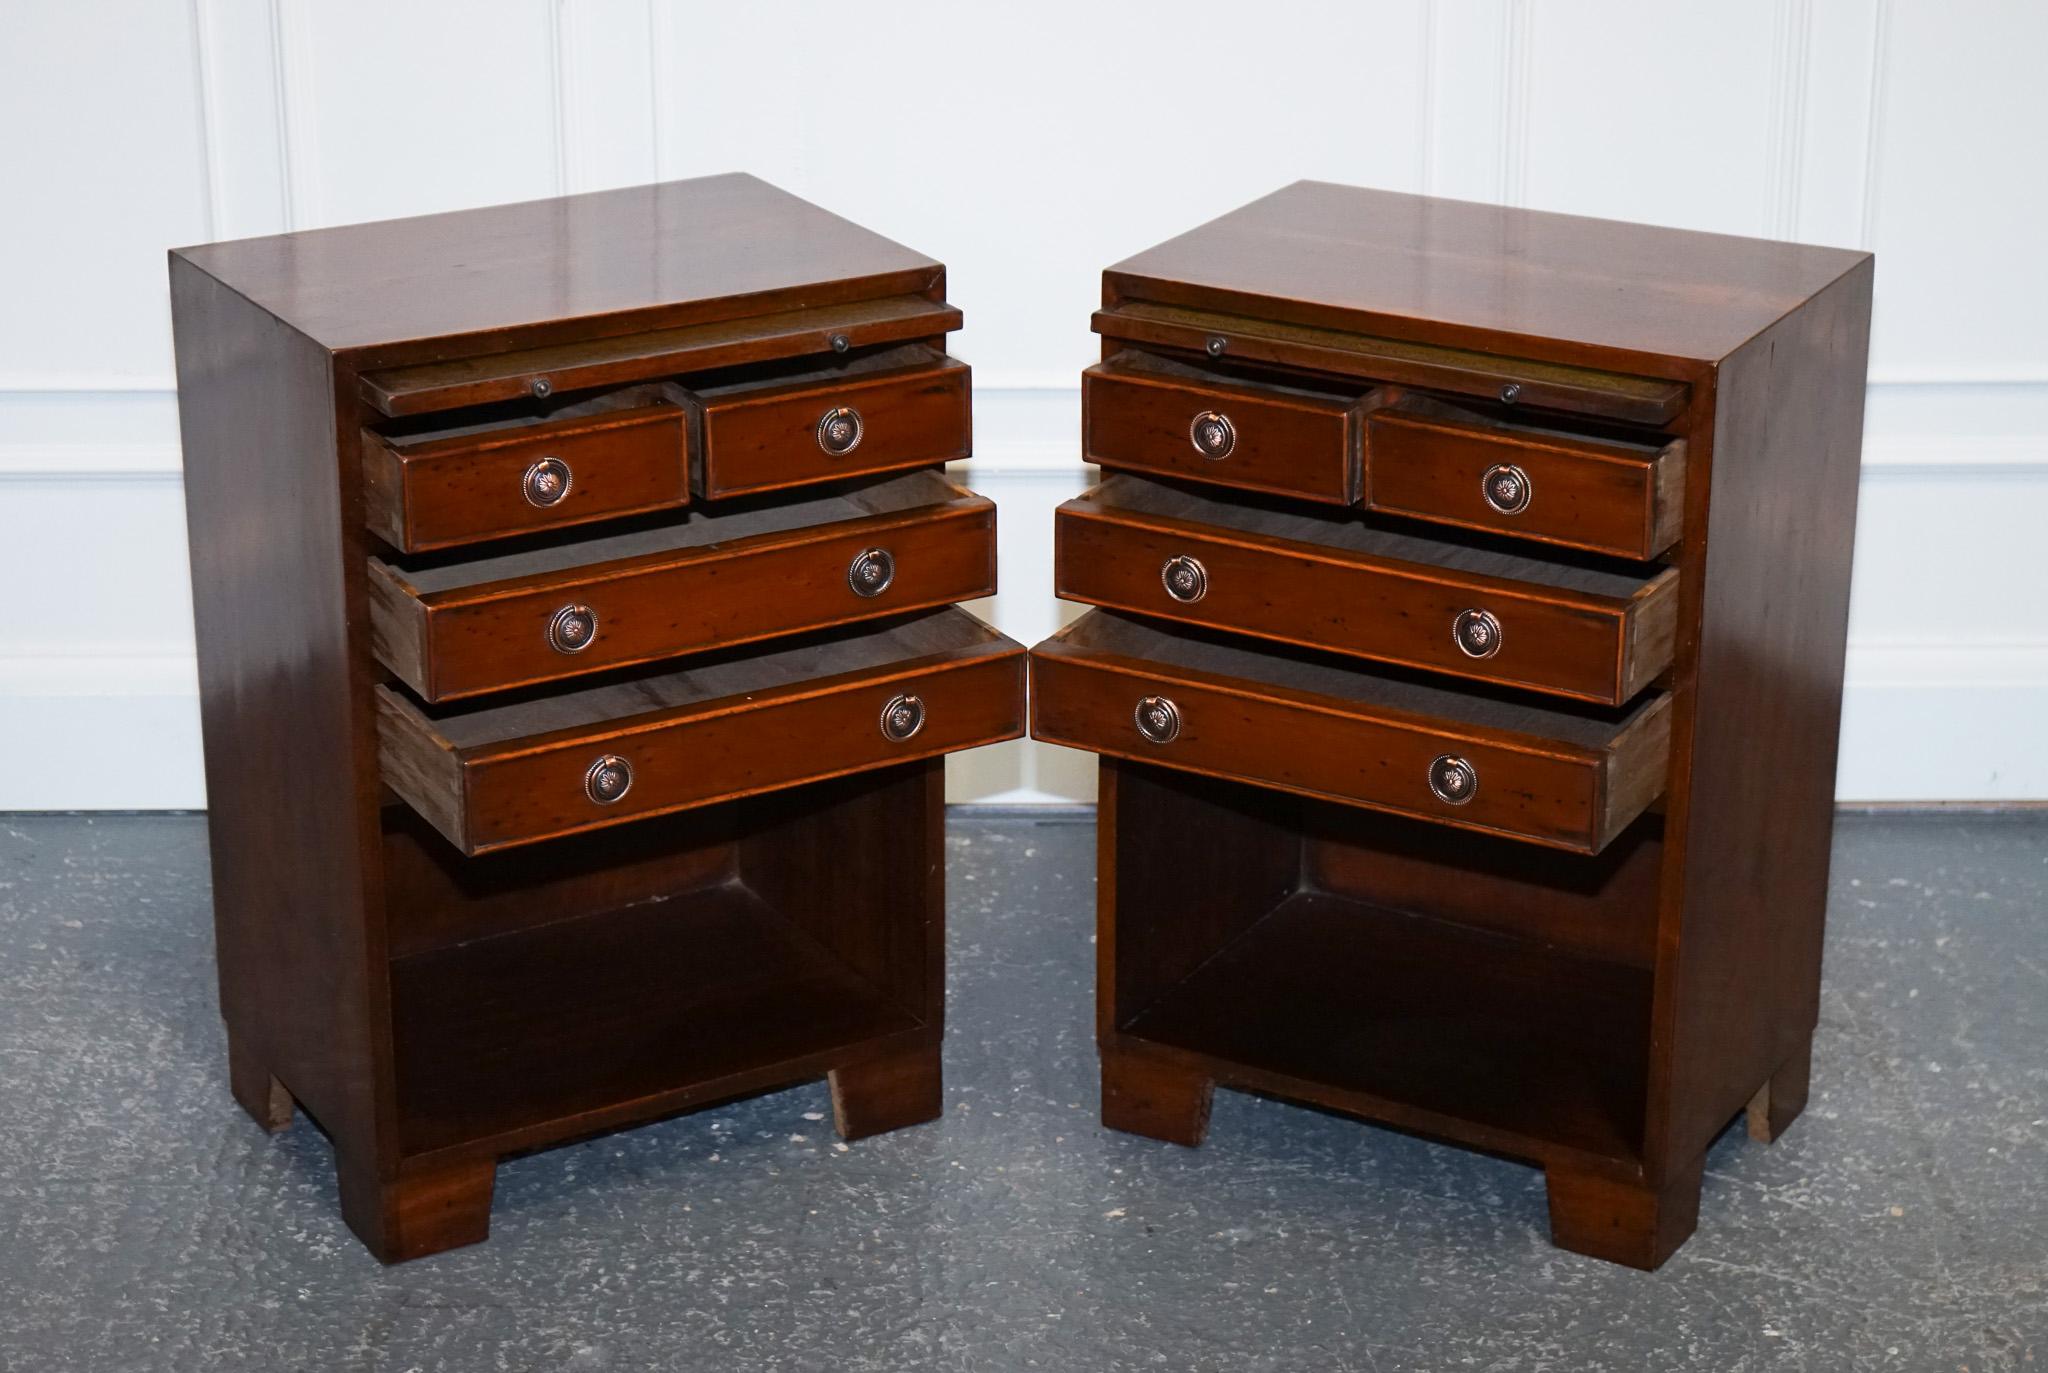 British GORGEOUS PAIR OF HARDWOOD GEORGIAN STYLE NIGHTSTANDS WiTH DRAWERS